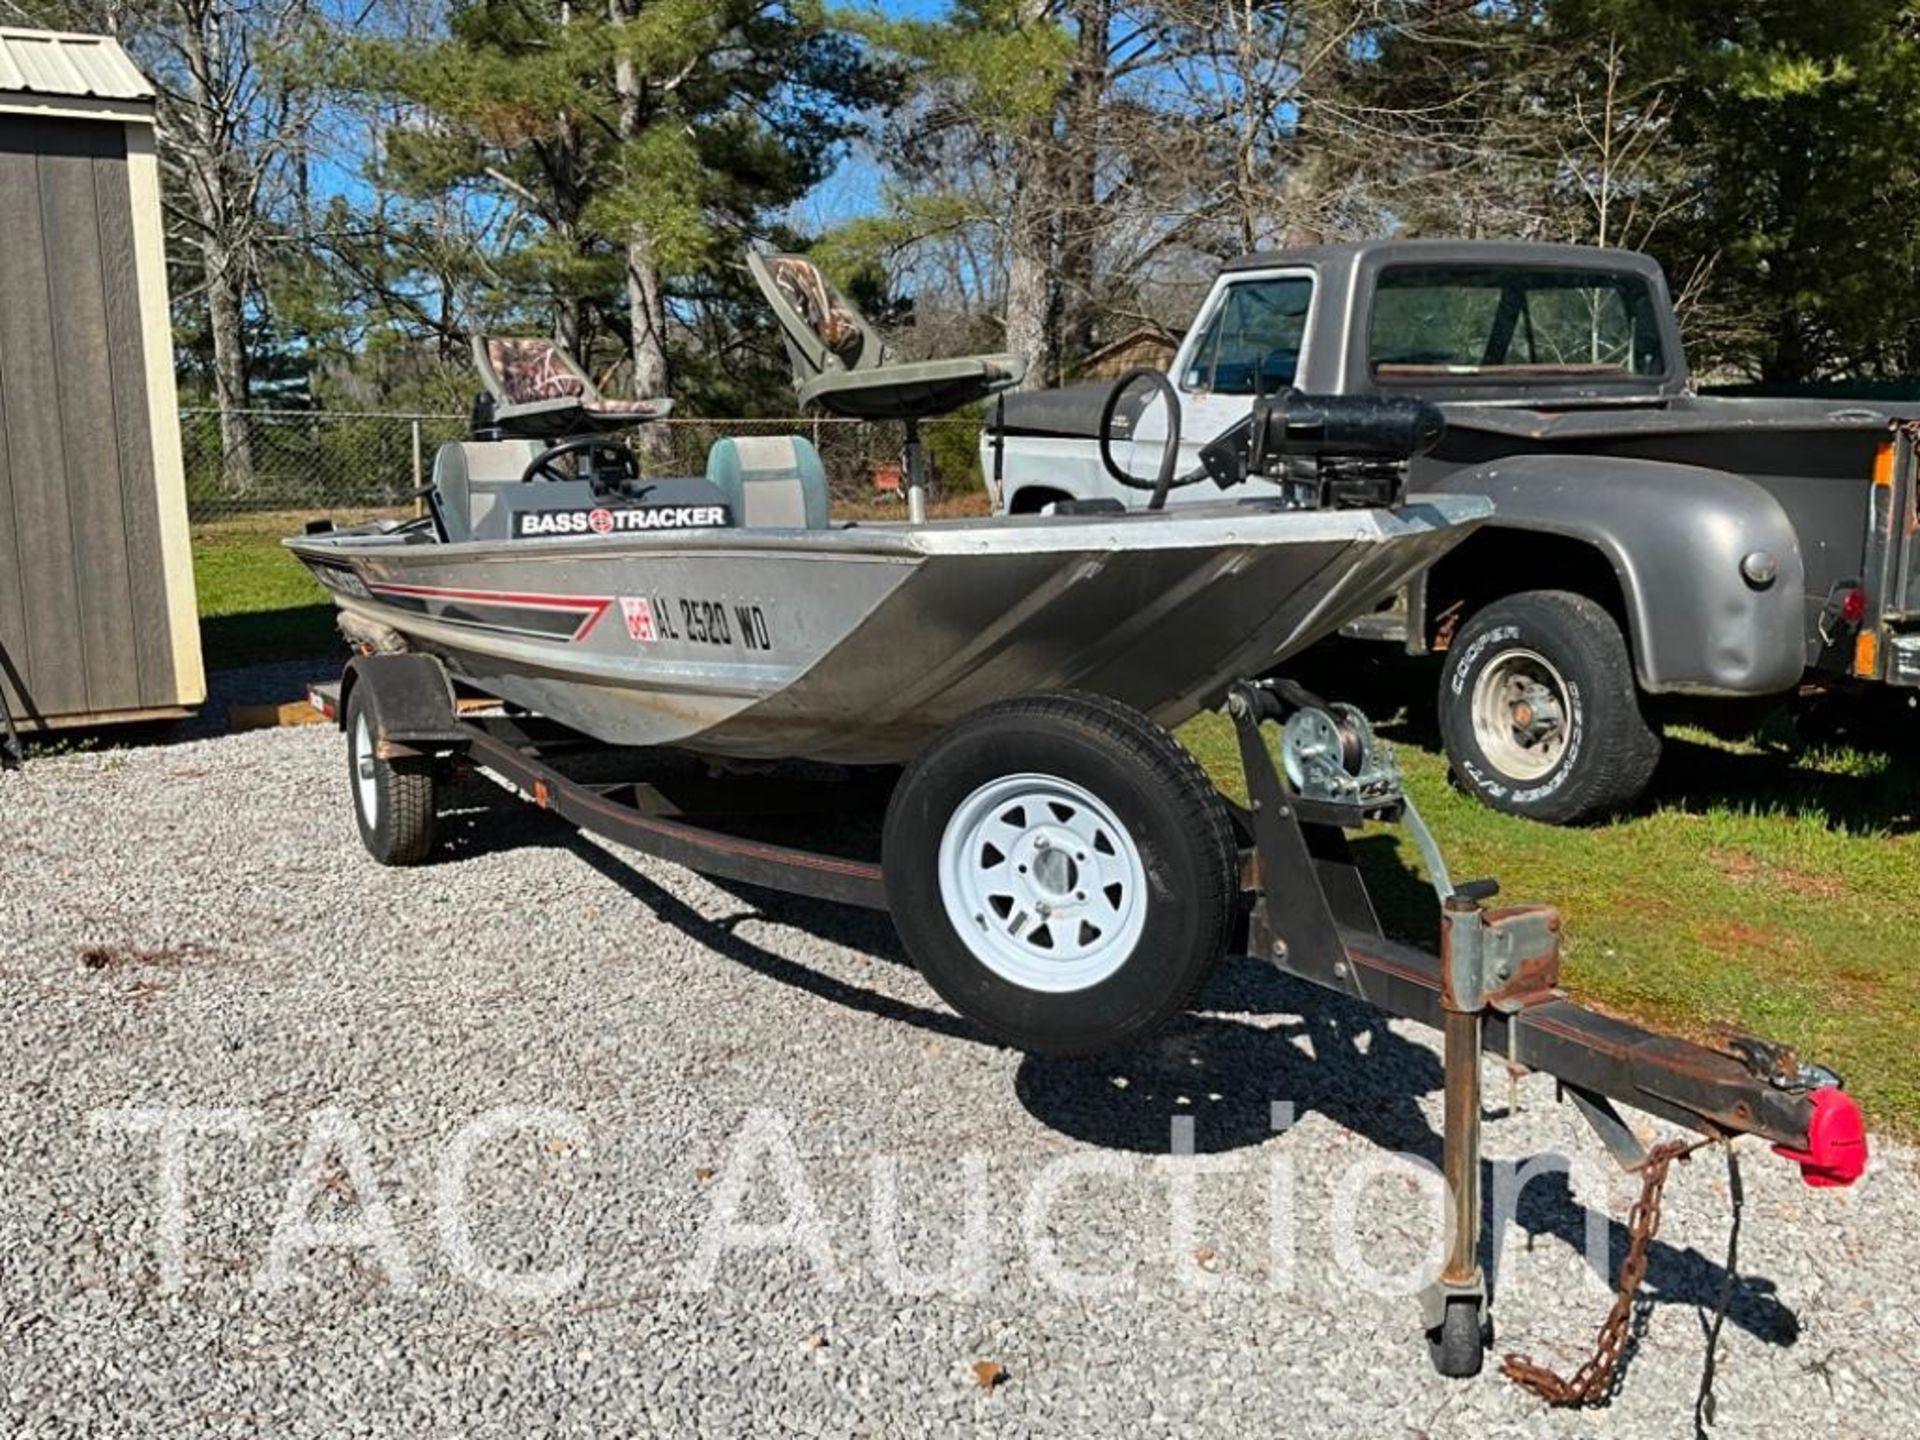 1989 Bass Tracker 17ft Bass Boat W/ Trailer - Image 9 of 52